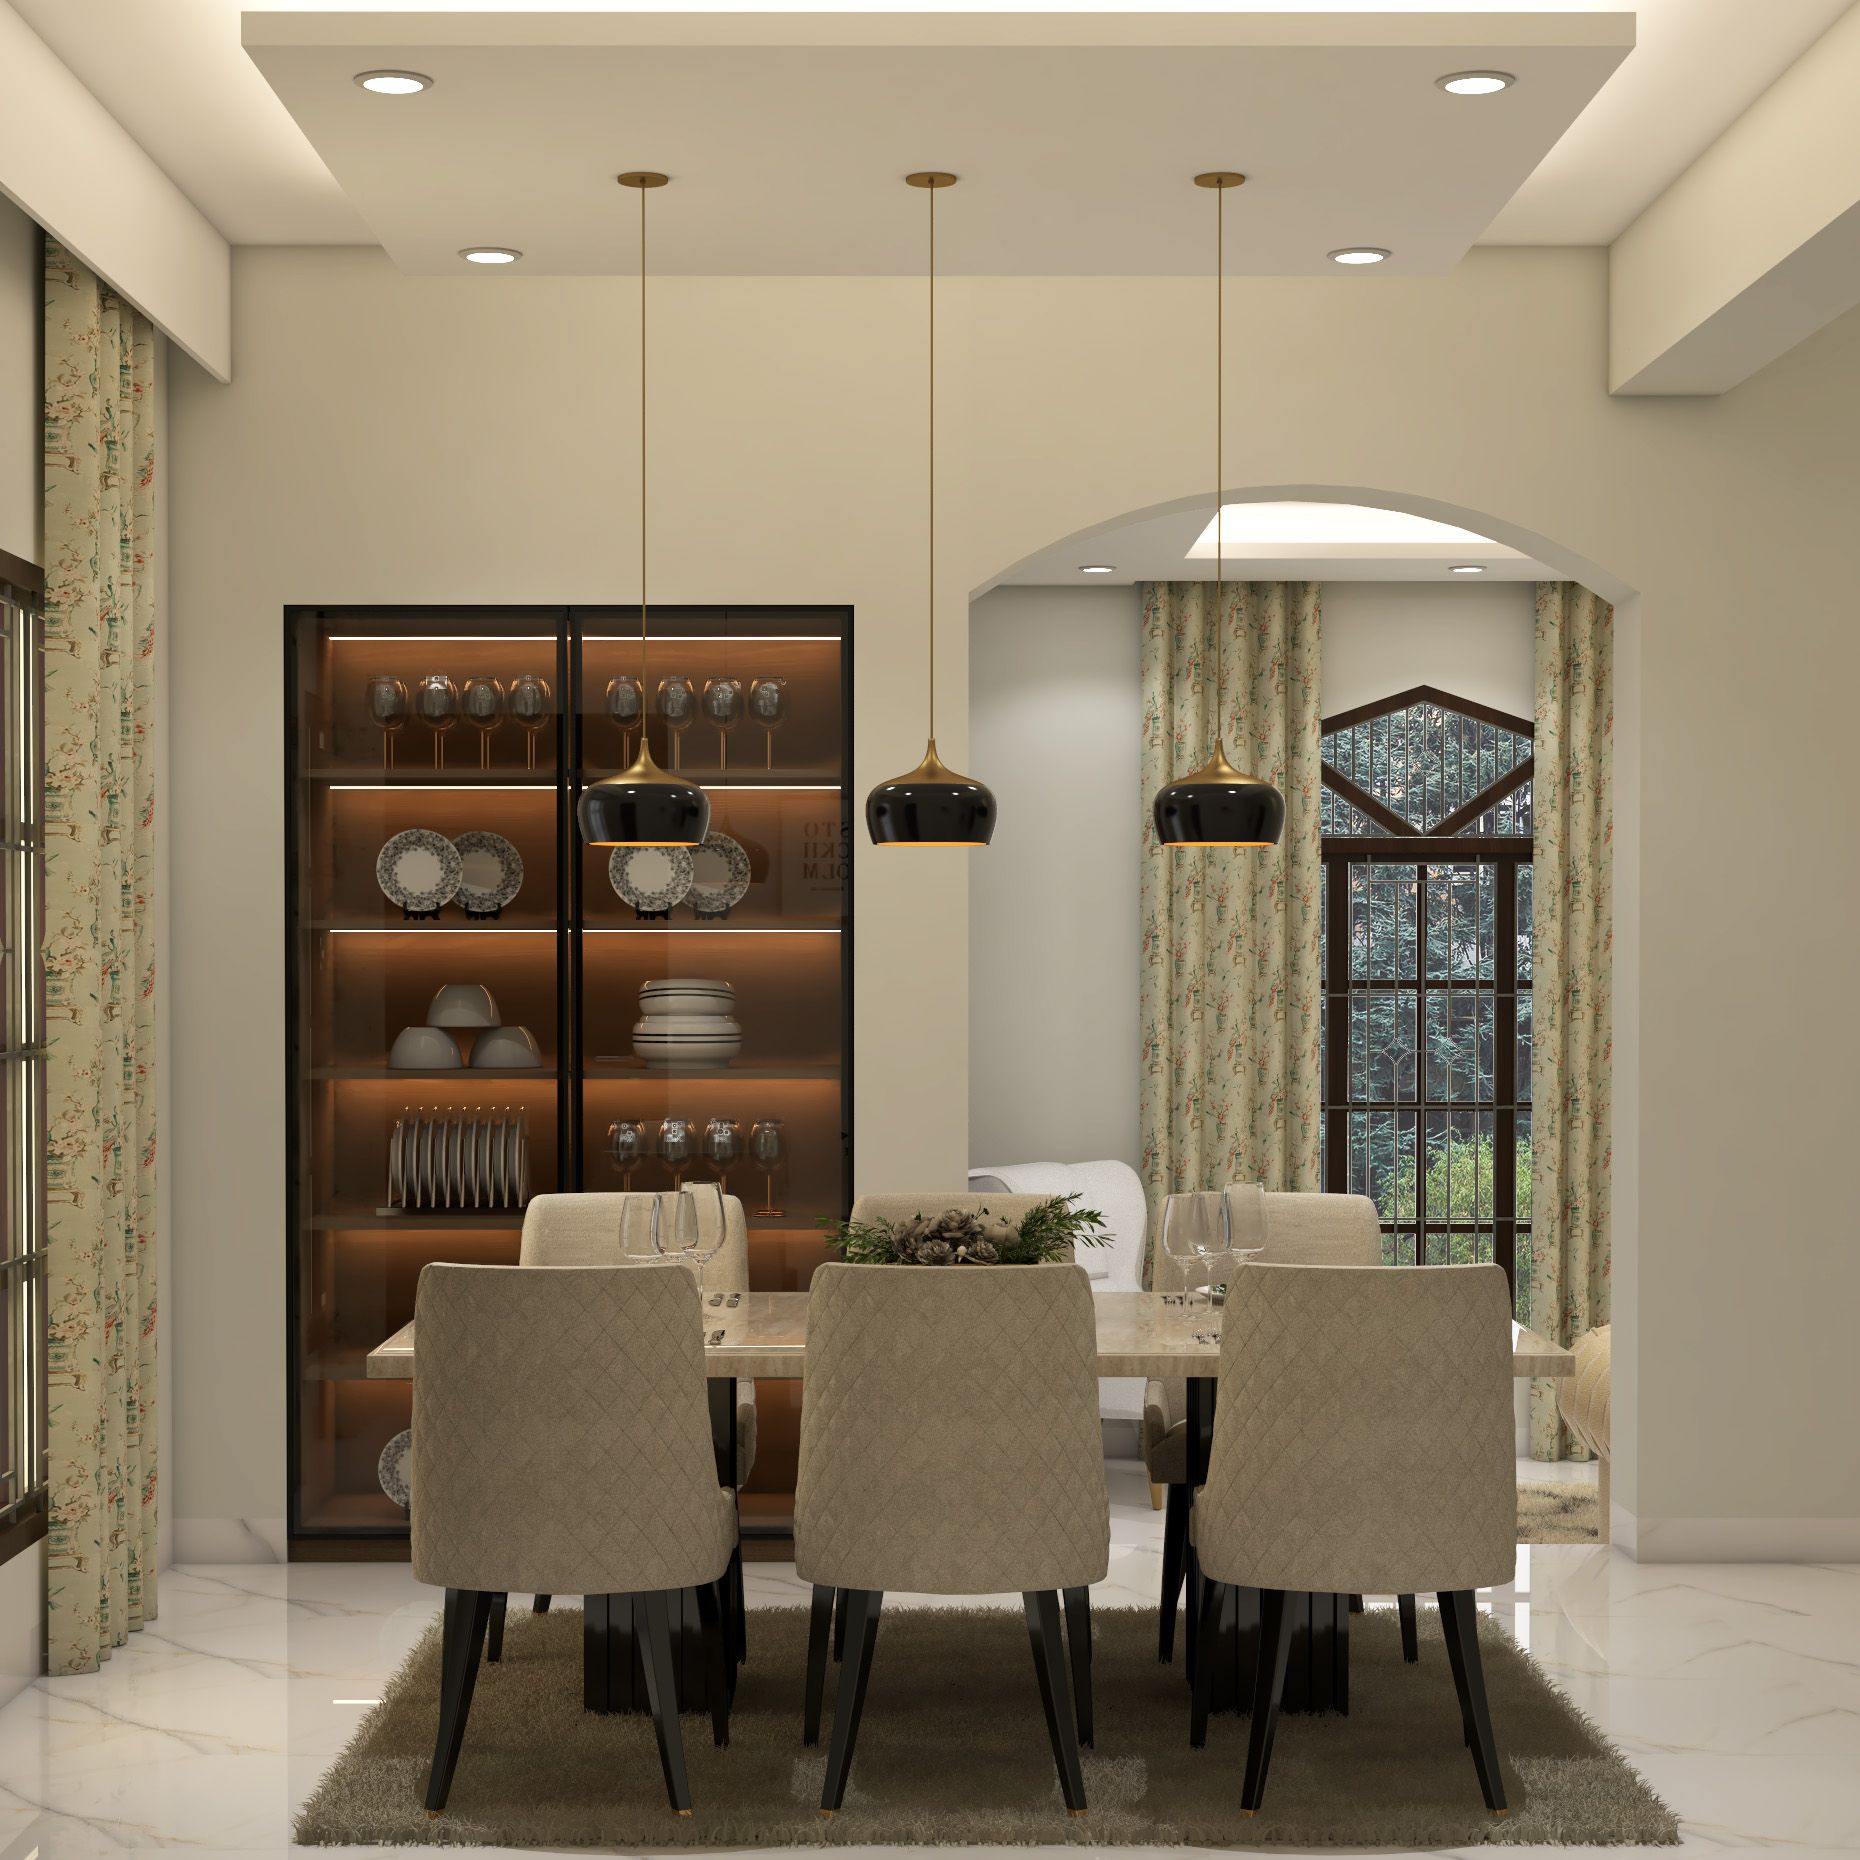 Contemporary Glossy 6-Seater Beige Dining Room Design With Black Pendant Lights